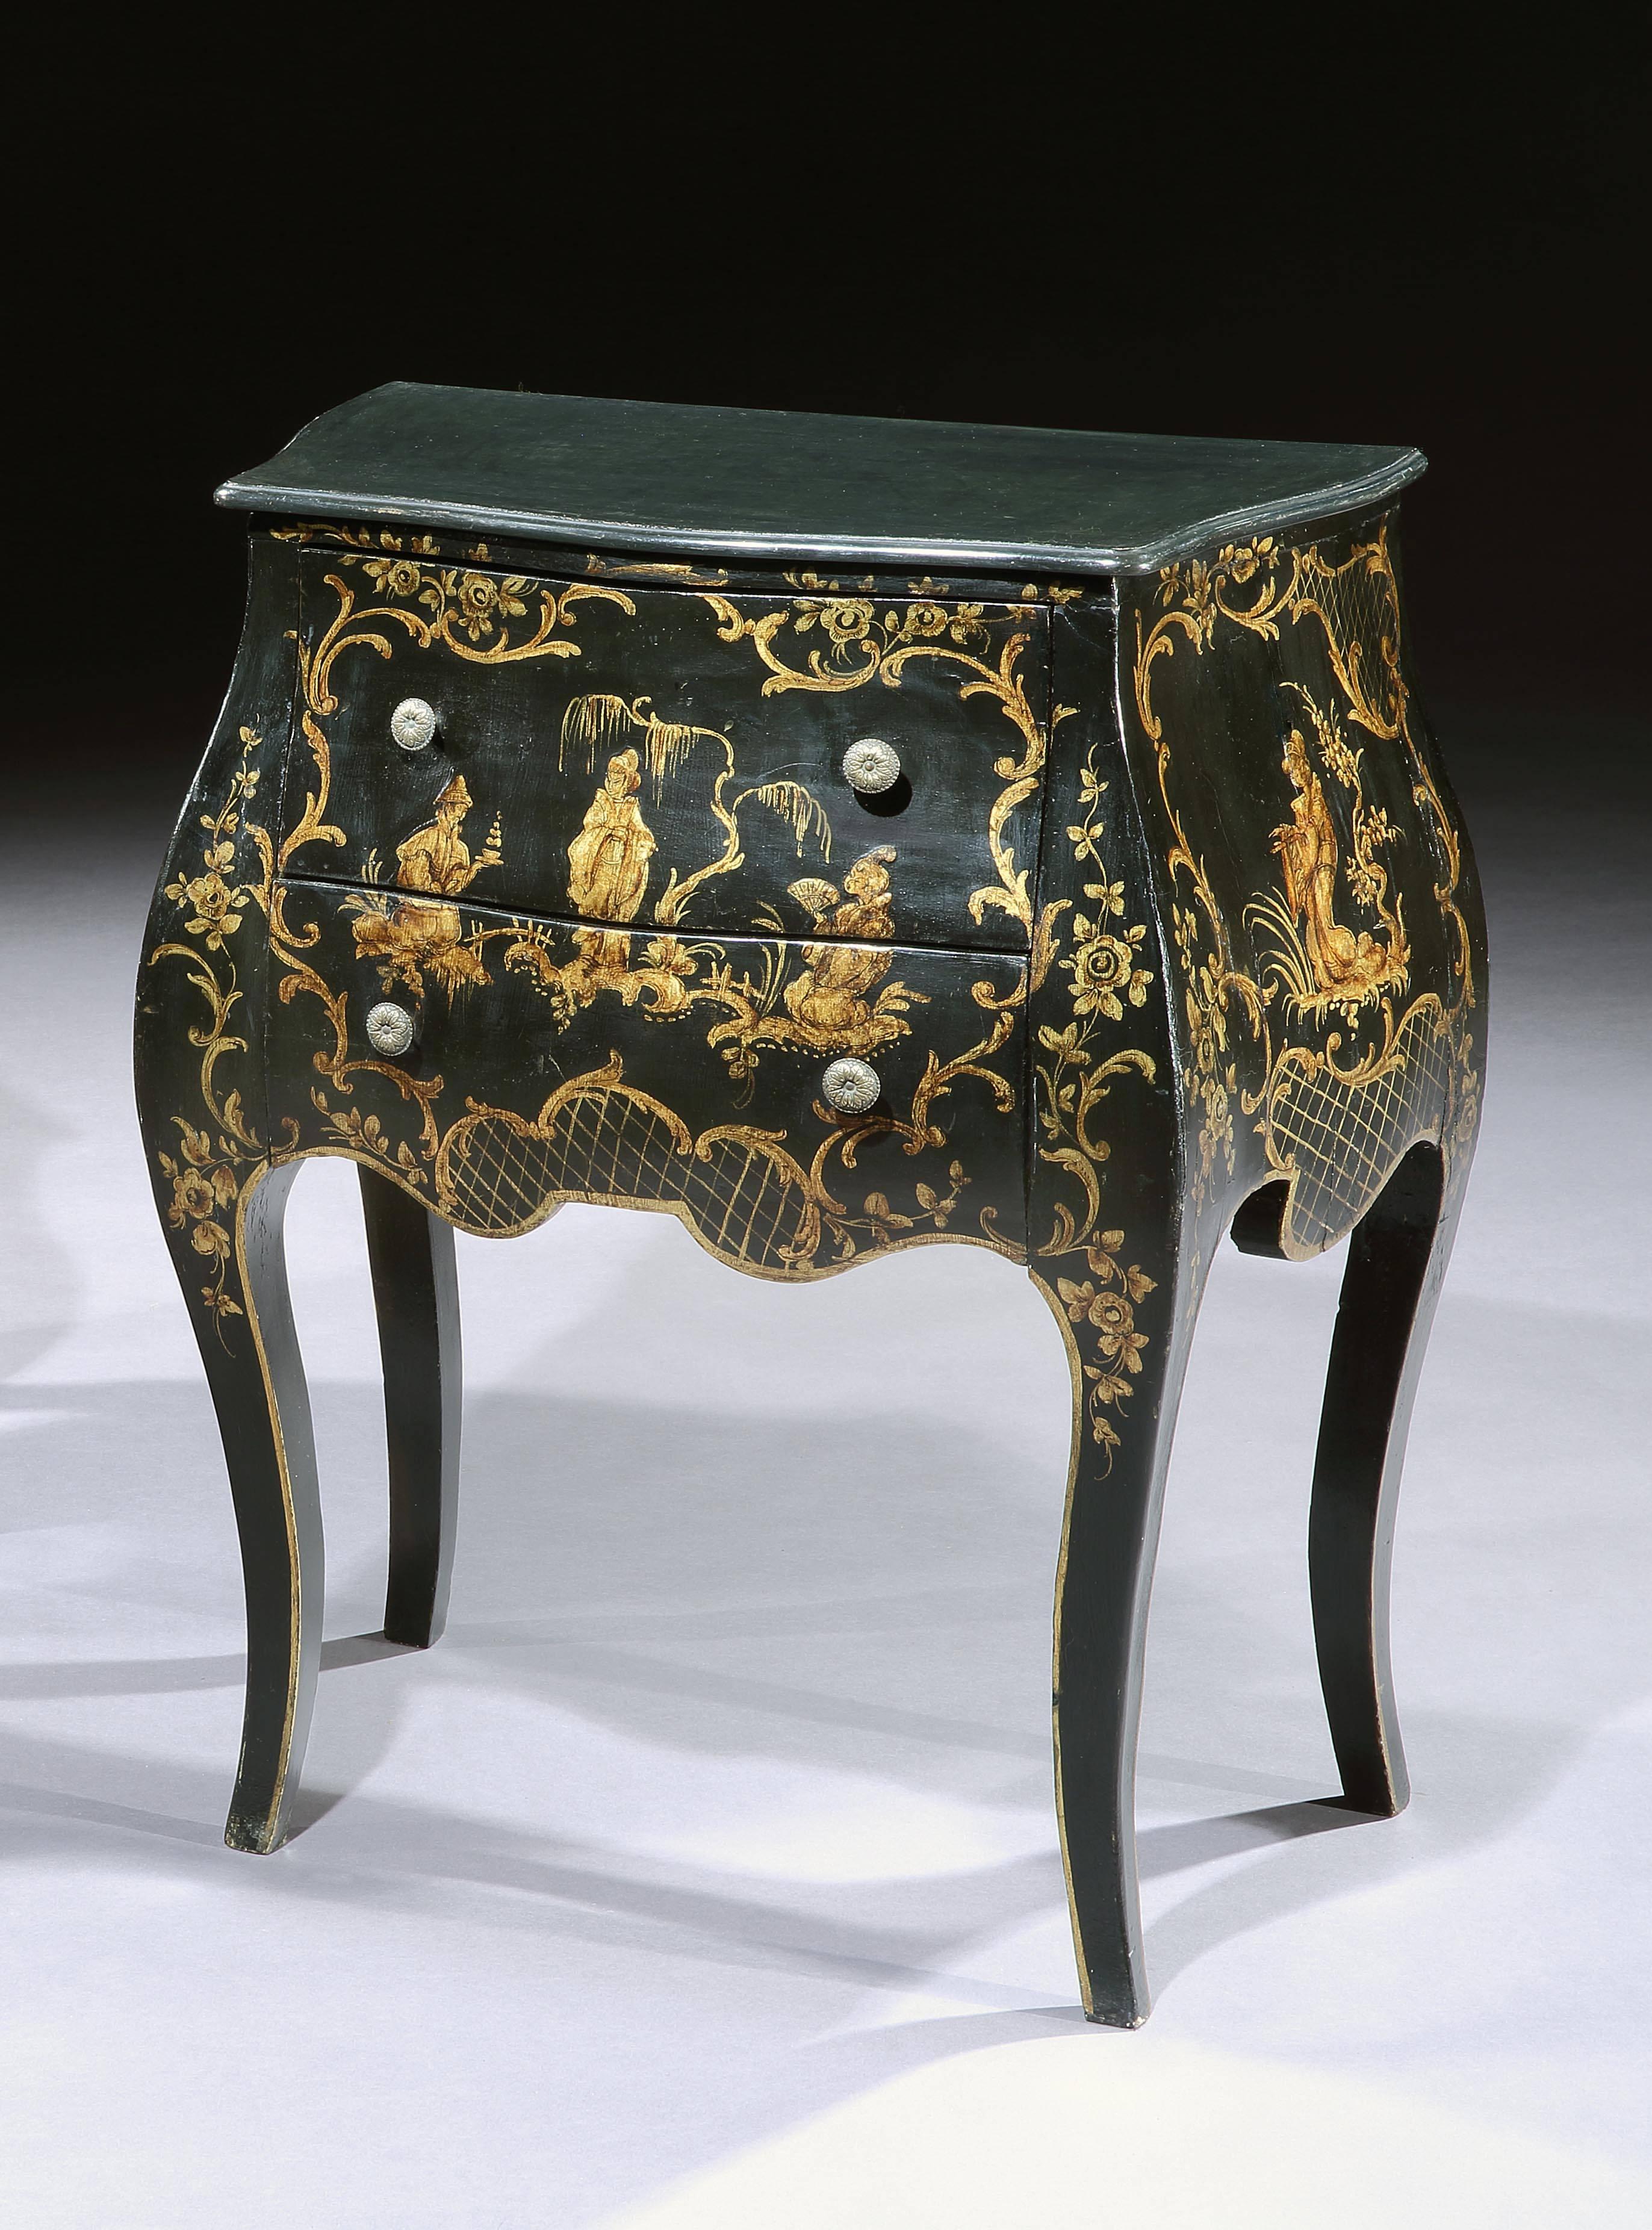 A rare pair of early nineteenth century North Italian black lacquer and chinoiserie decorated bedside commodes.